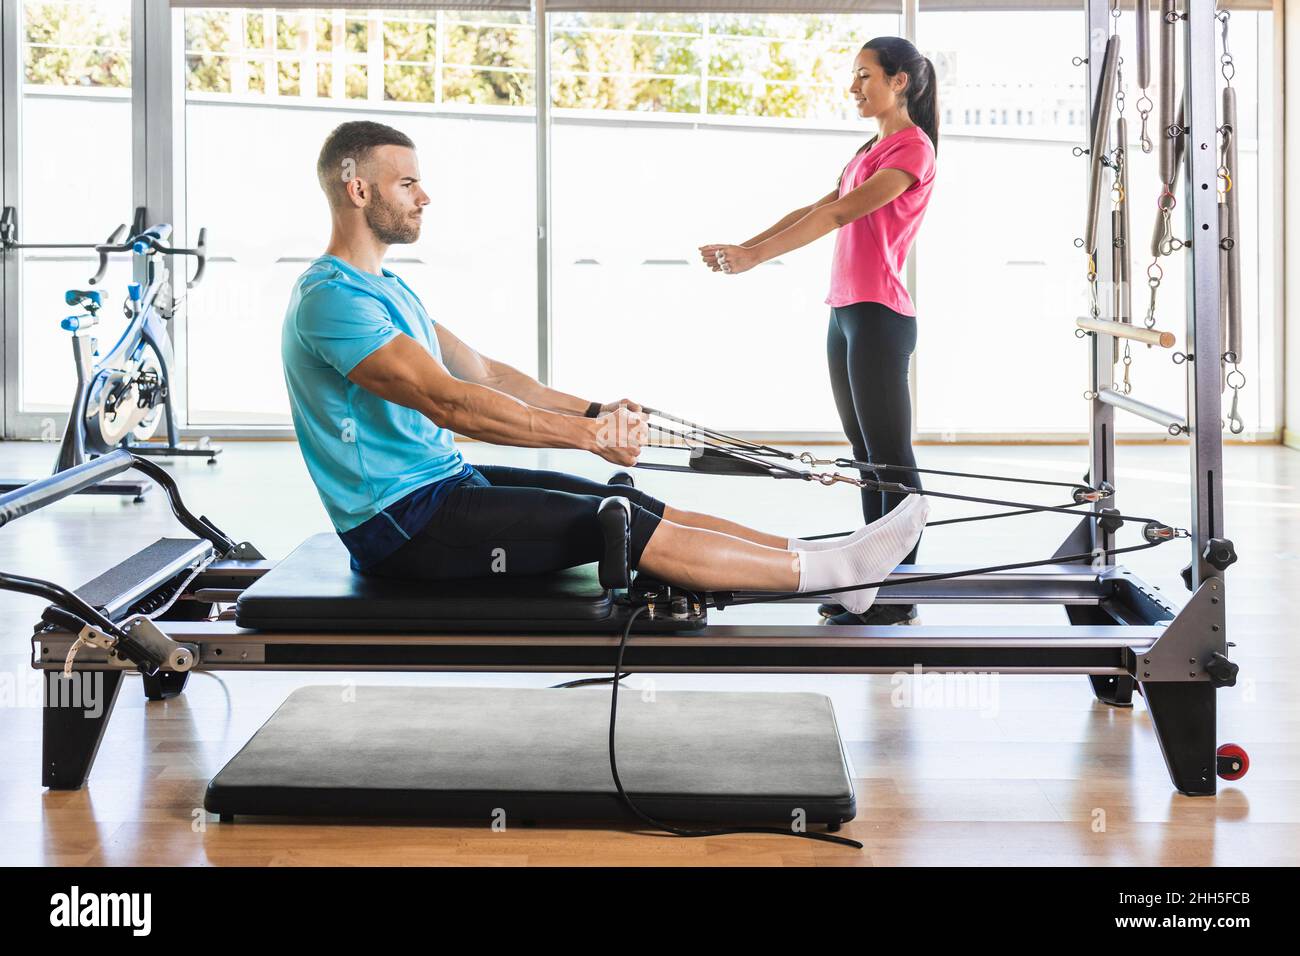 Fitness instructor showing exercise to athlete on exercise equipment Stock Photo